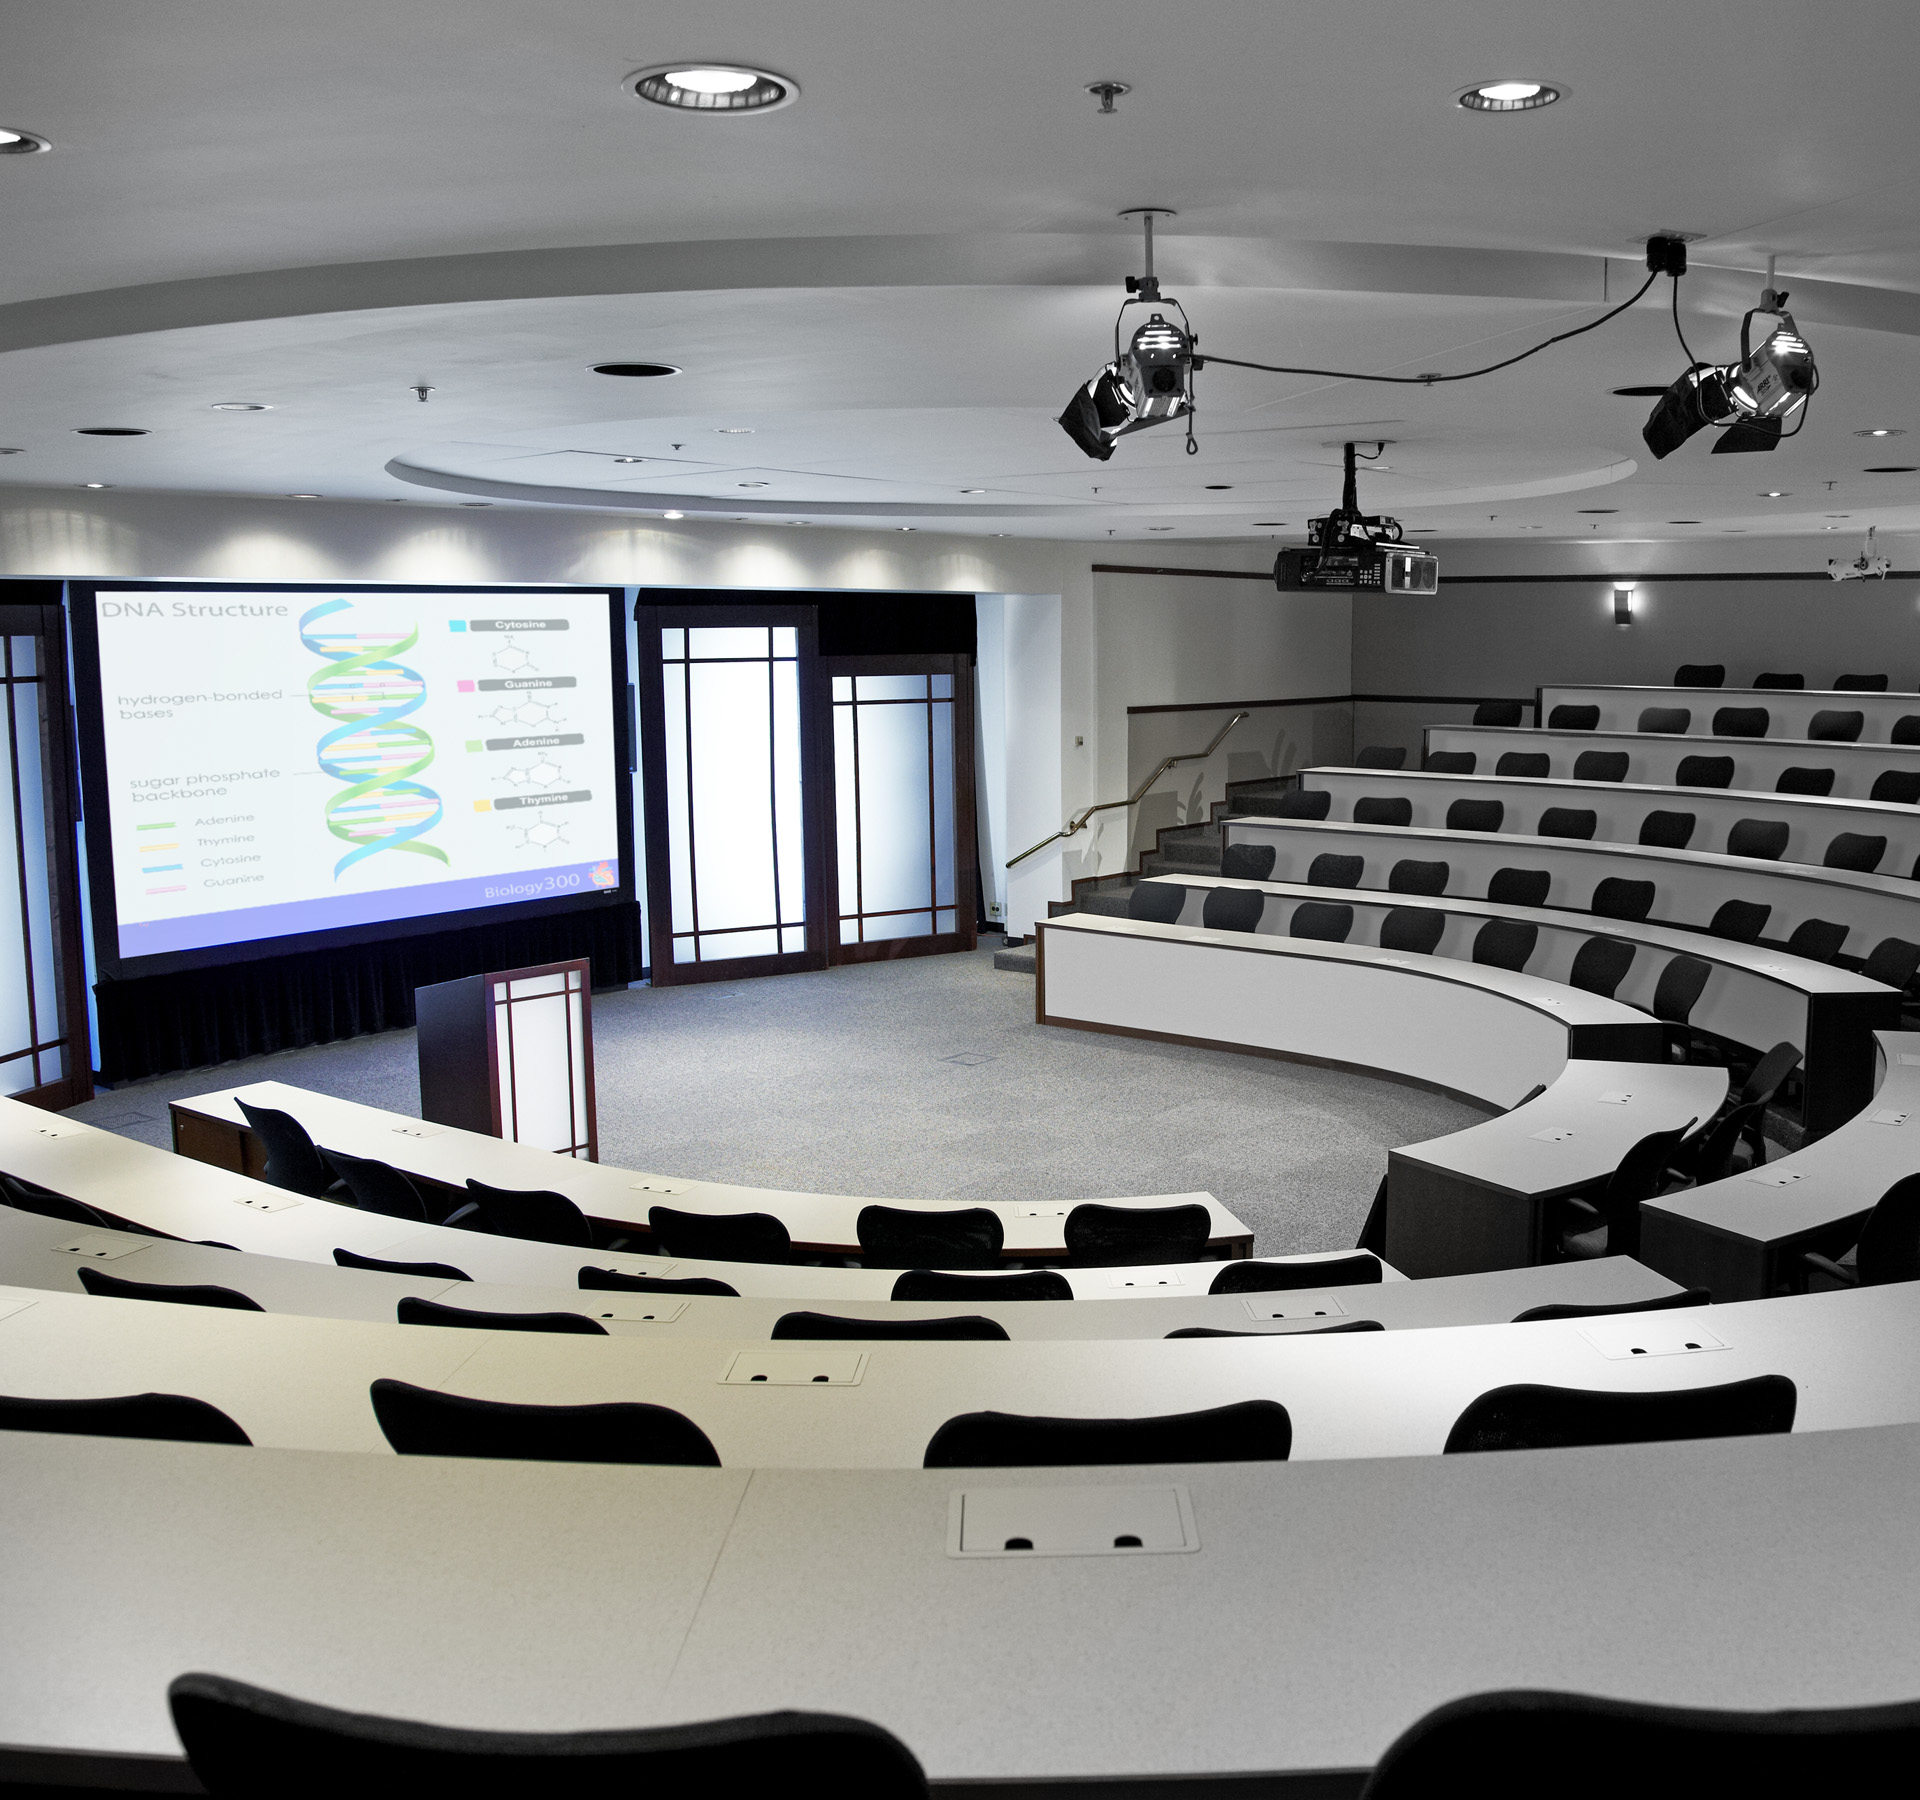 Lecture hall. Lecture Theatre. Lecture.